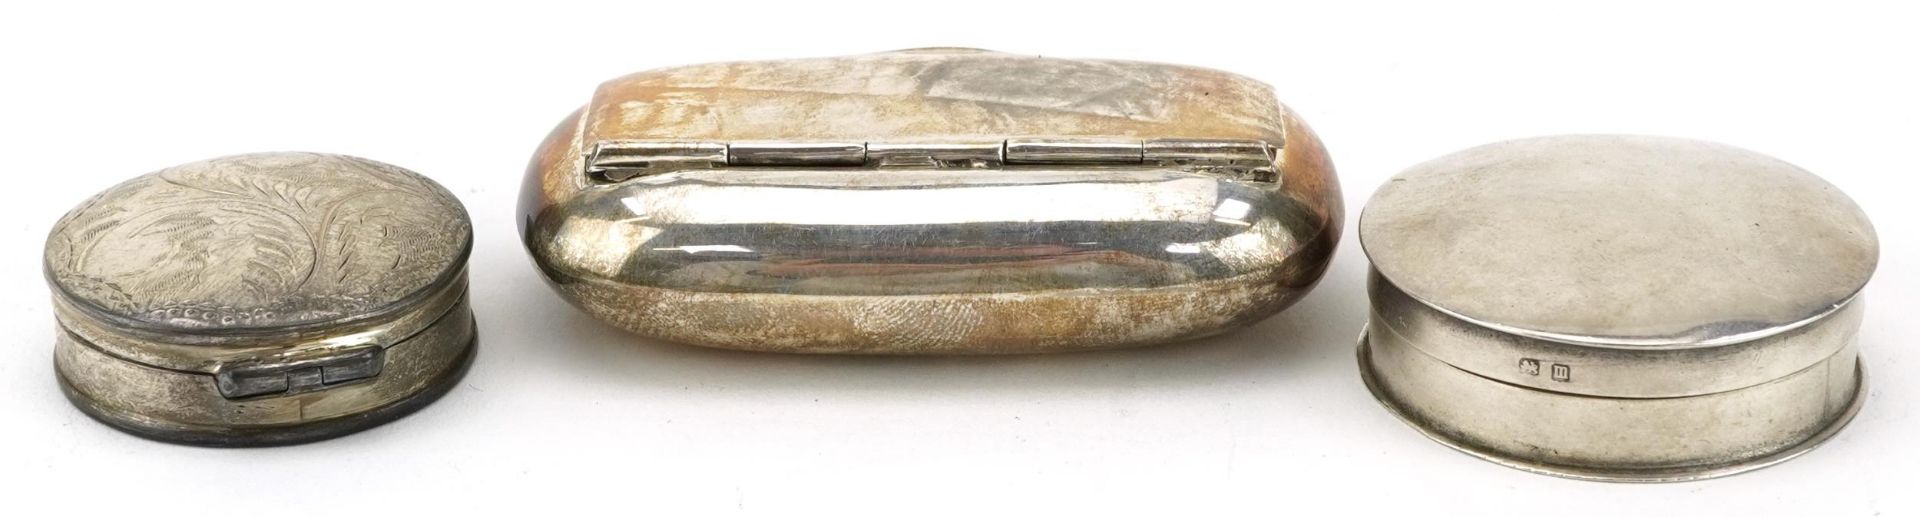 Two circular silver pillboxes and a silver snuff box, the largest 6.5cm wide, total 58.2g - Image 3 of 8